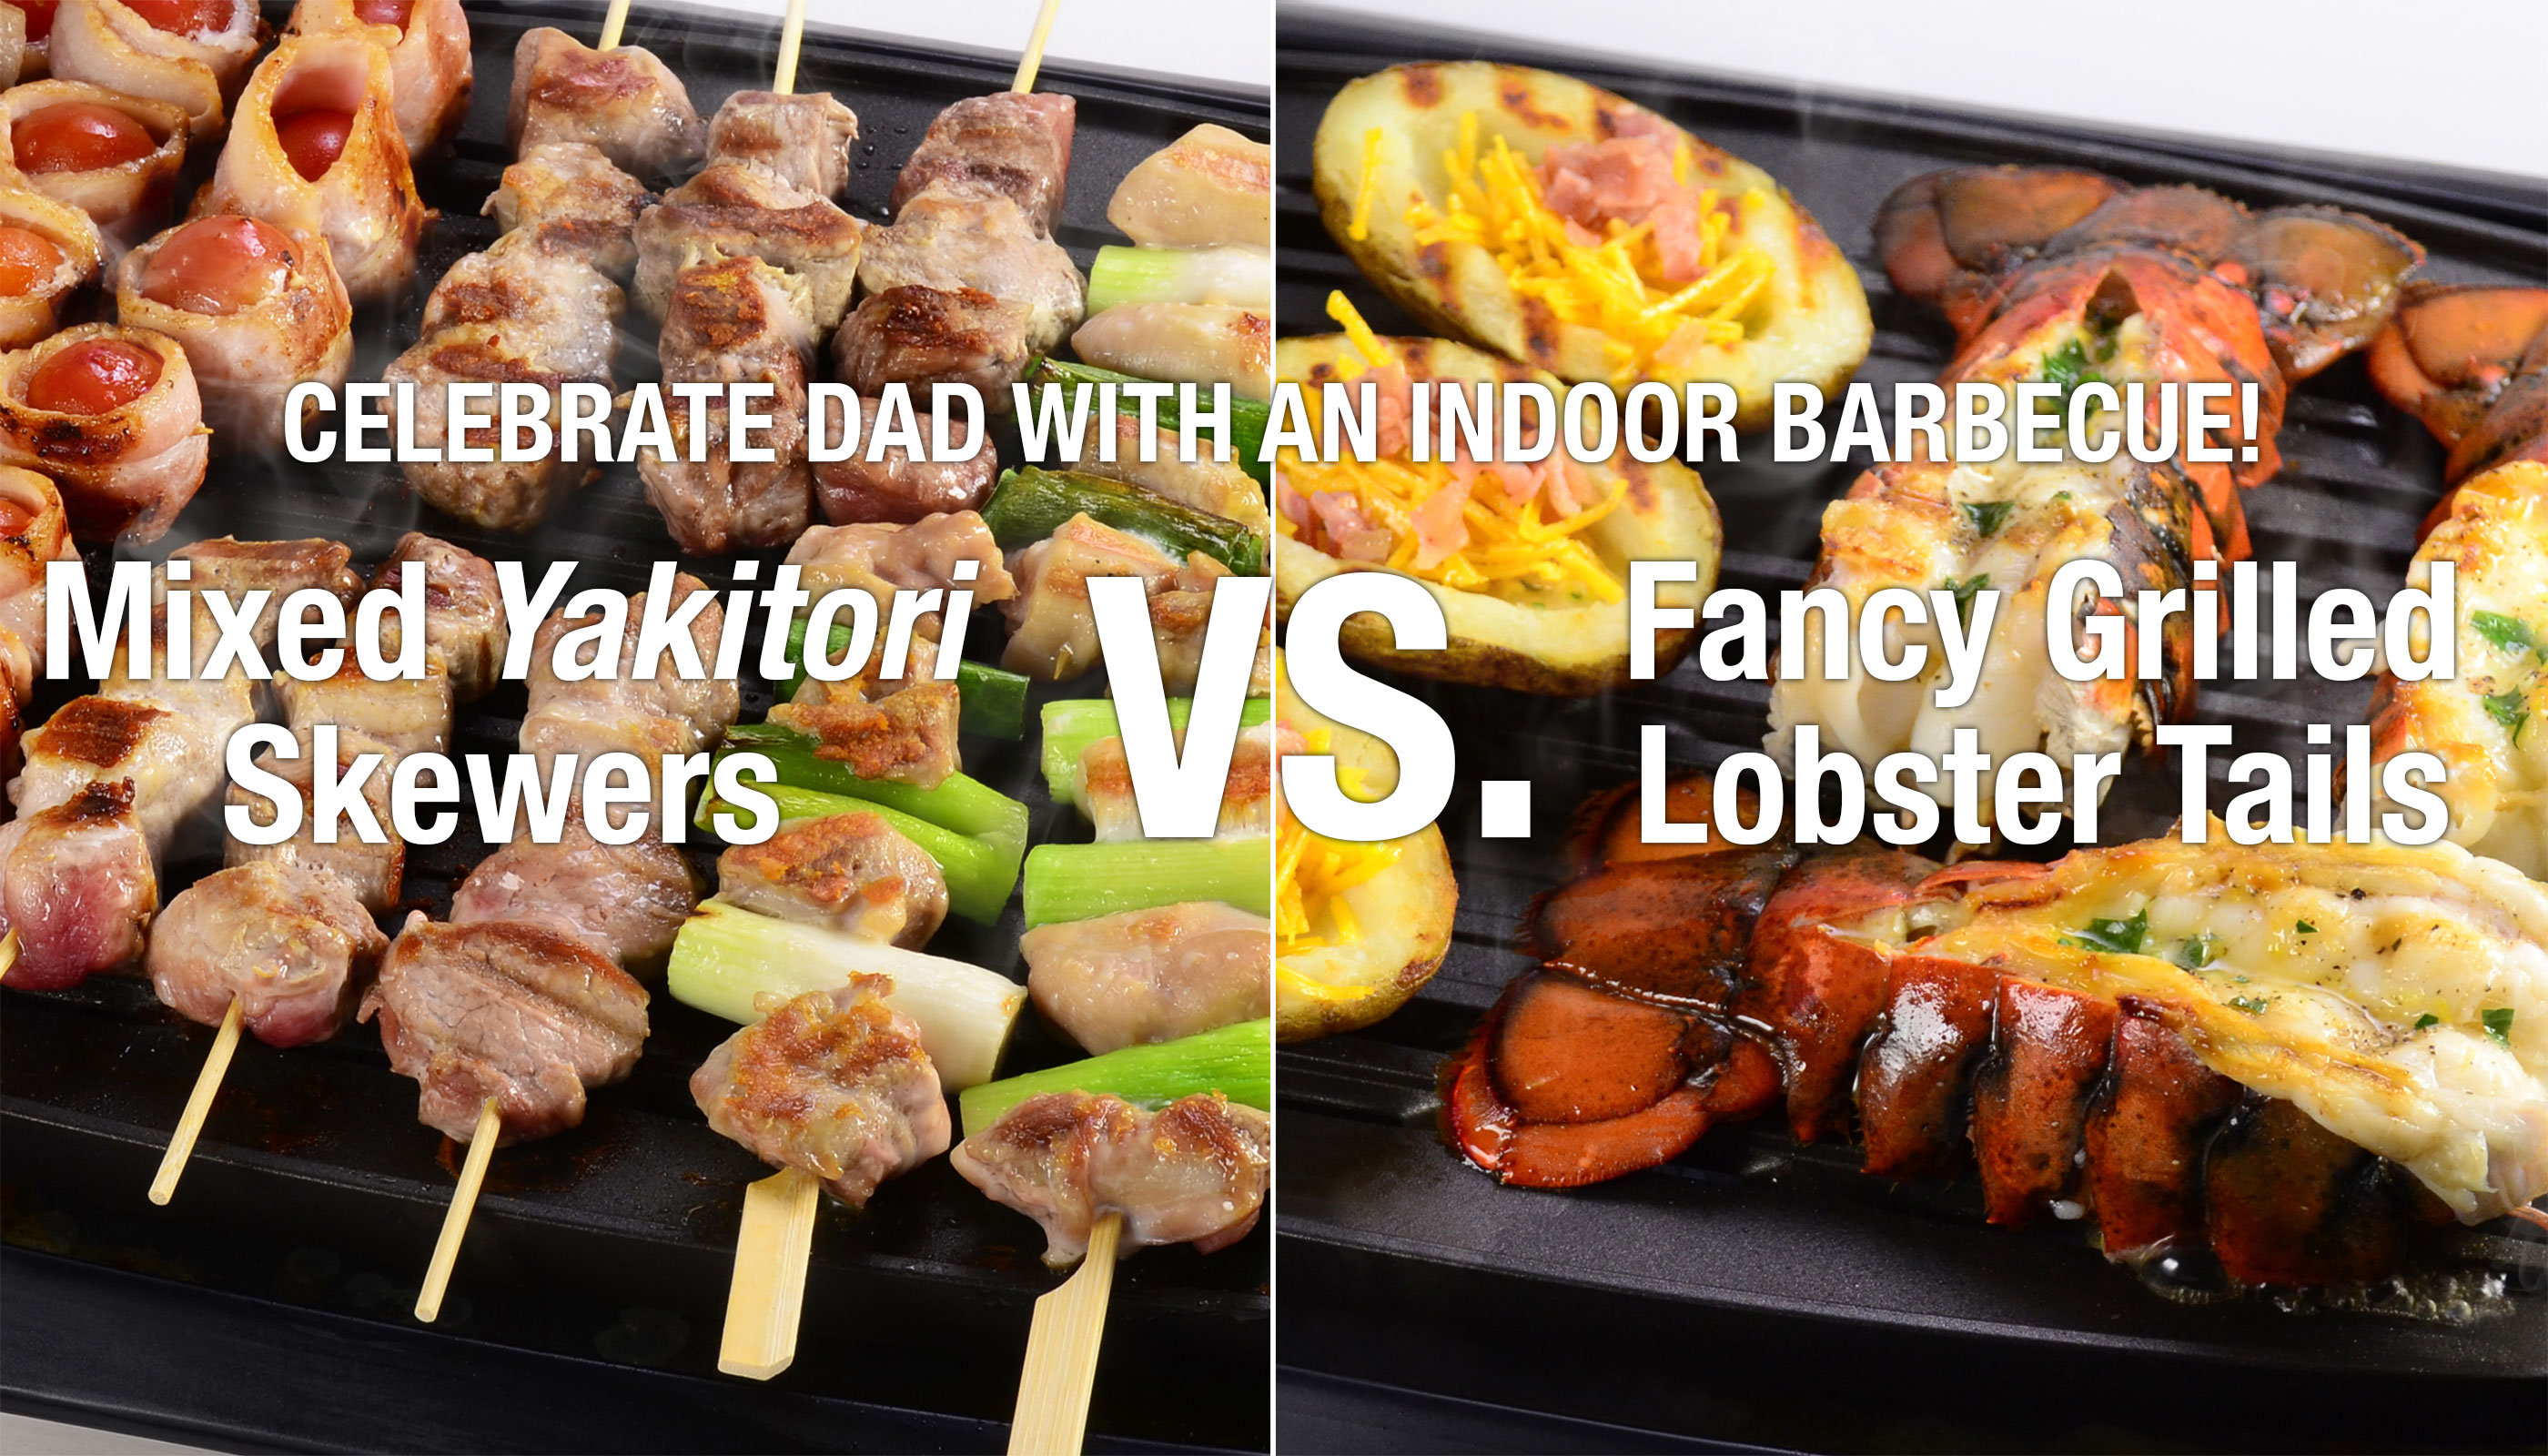 CELEBRATE DAD WITH AN INDOOR BARBECUE!